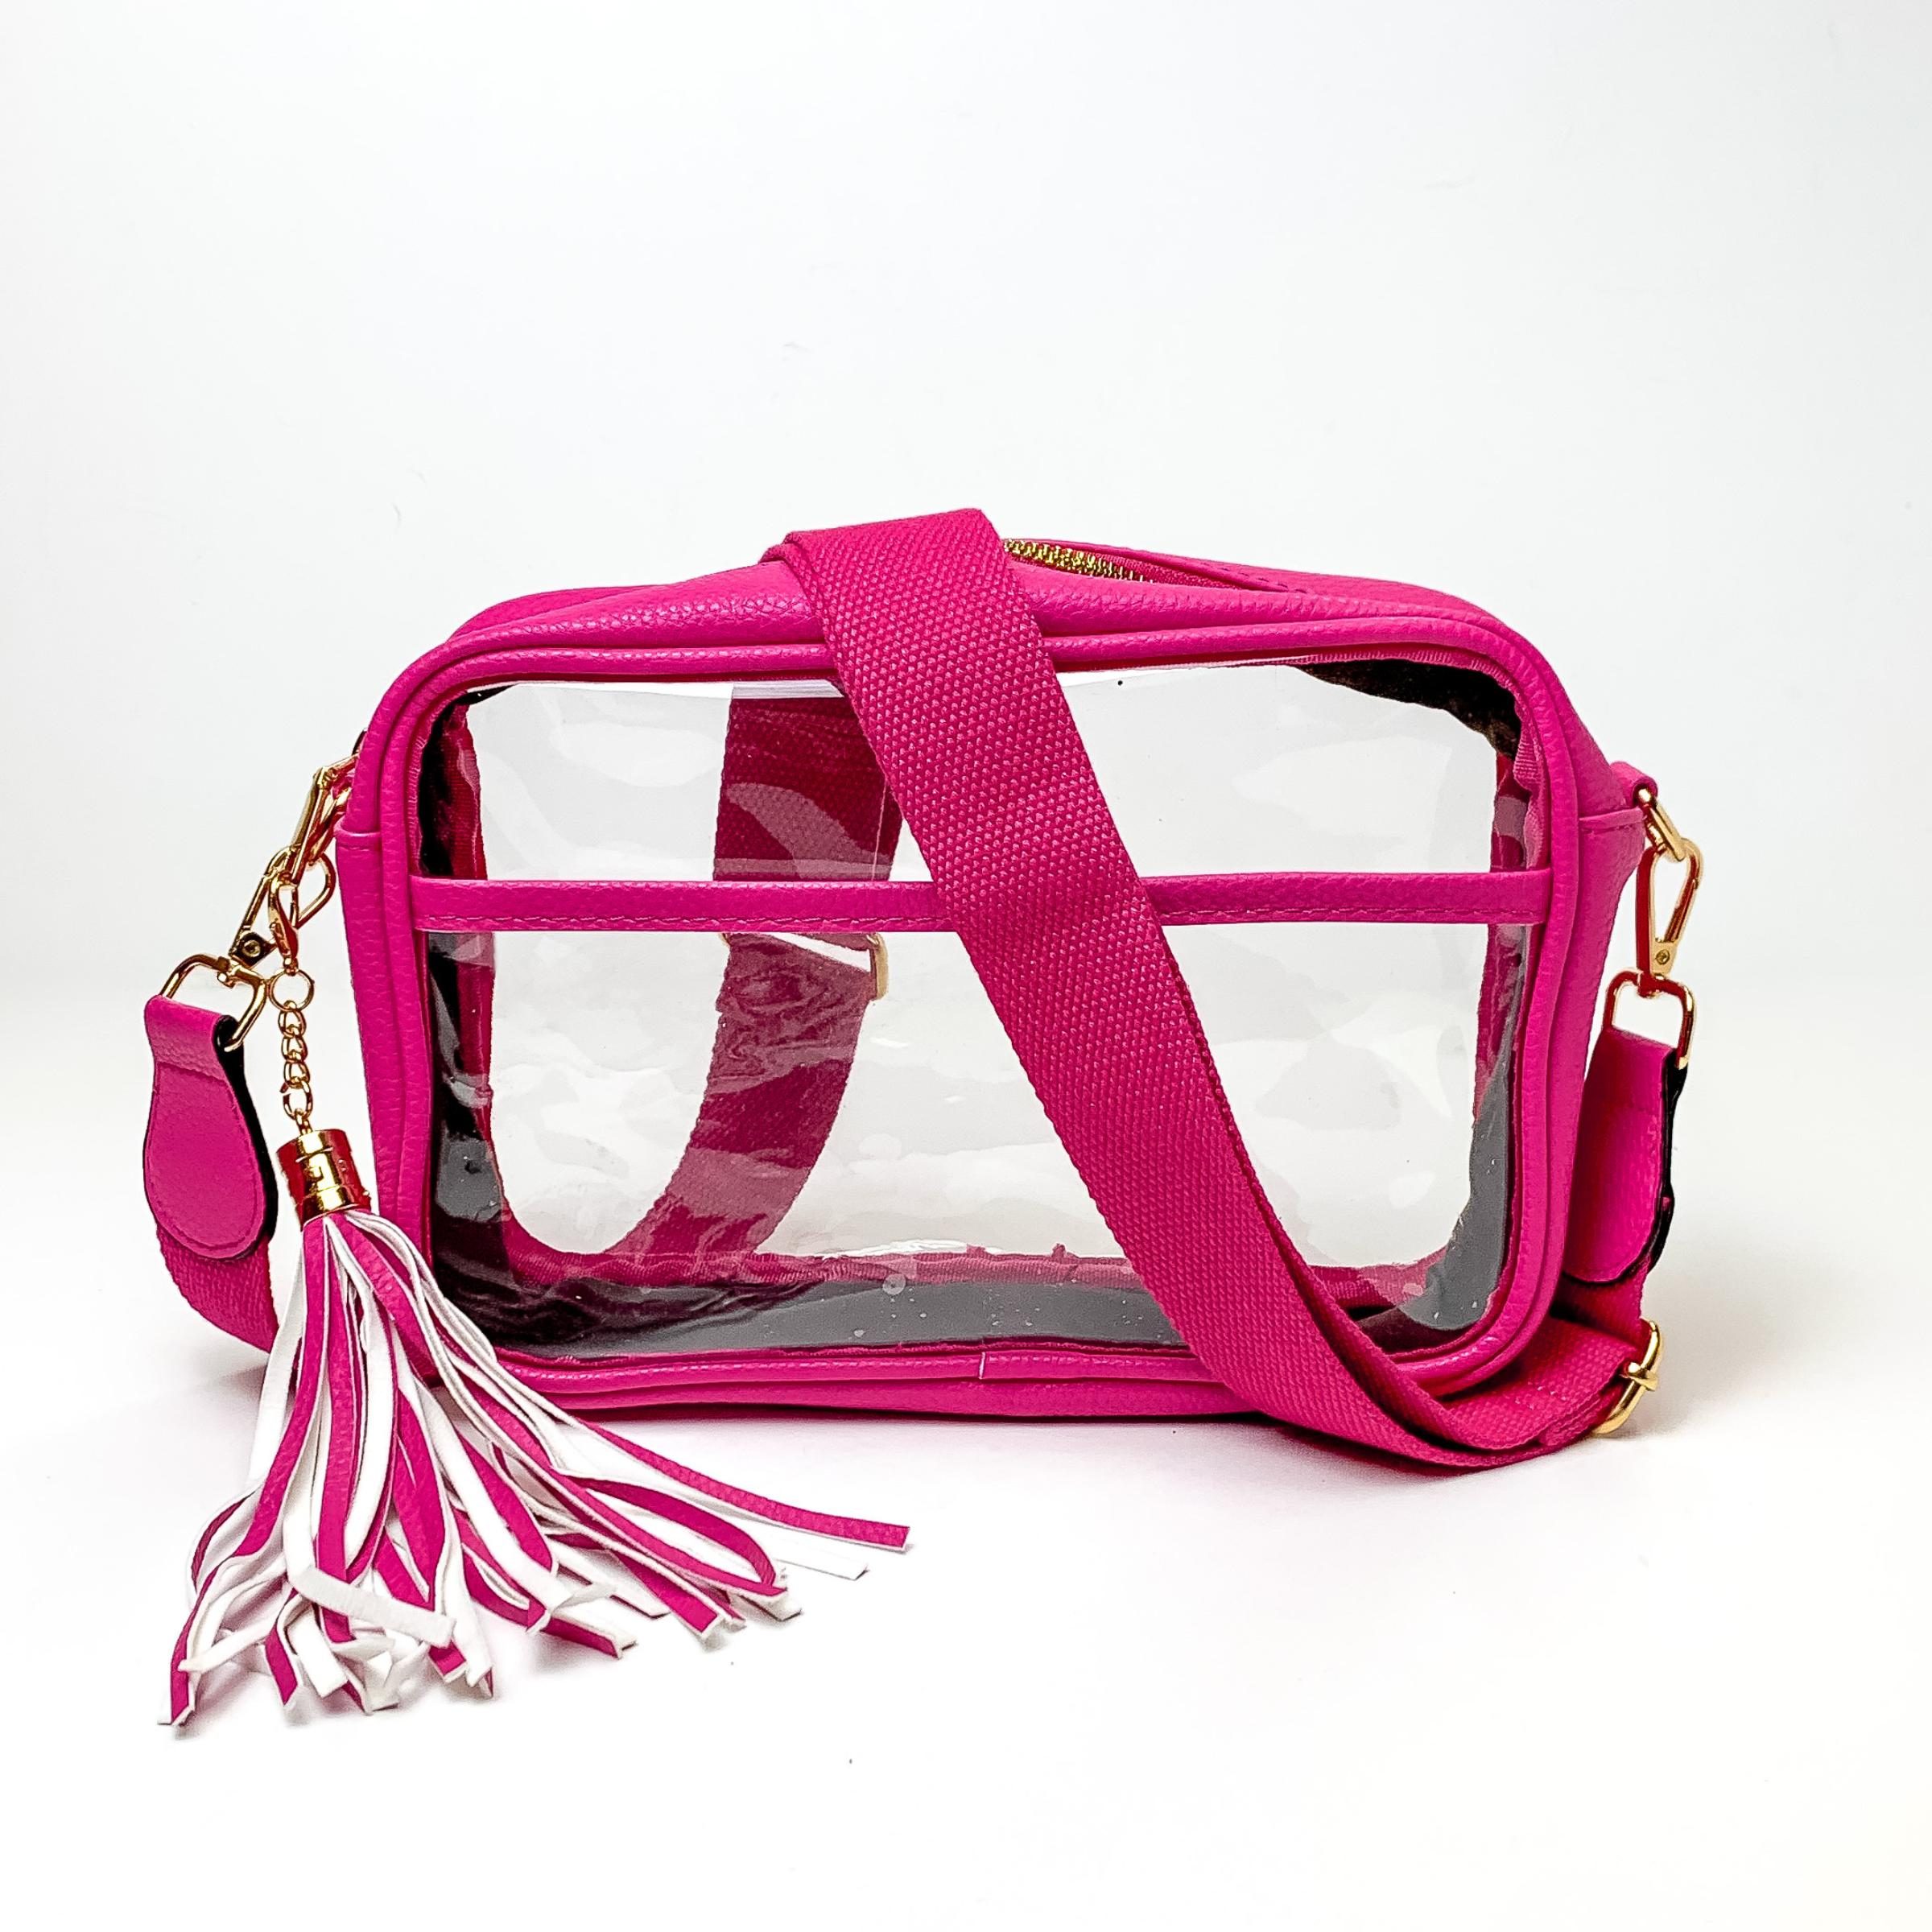 Pictured on a white background is a clear, rectangle purse with a fuchsia pink outline. This purse includes gold accessories, a fuchsia pink strap that is draped over the purse, and a pink and white fringe tassel. 